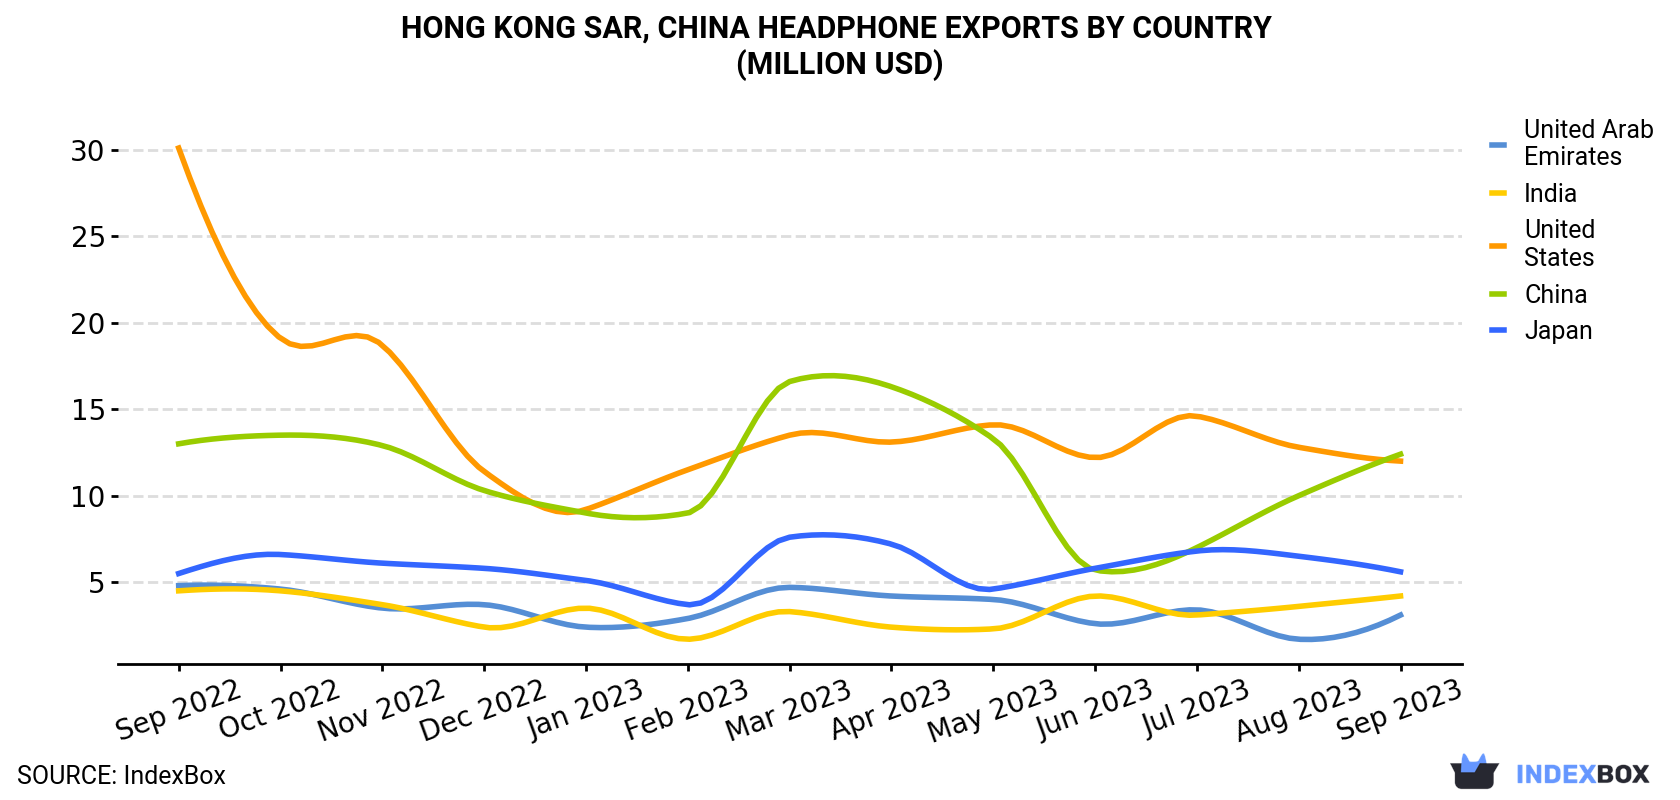 Hong Kong Headphone Exports By Country (Million USD)